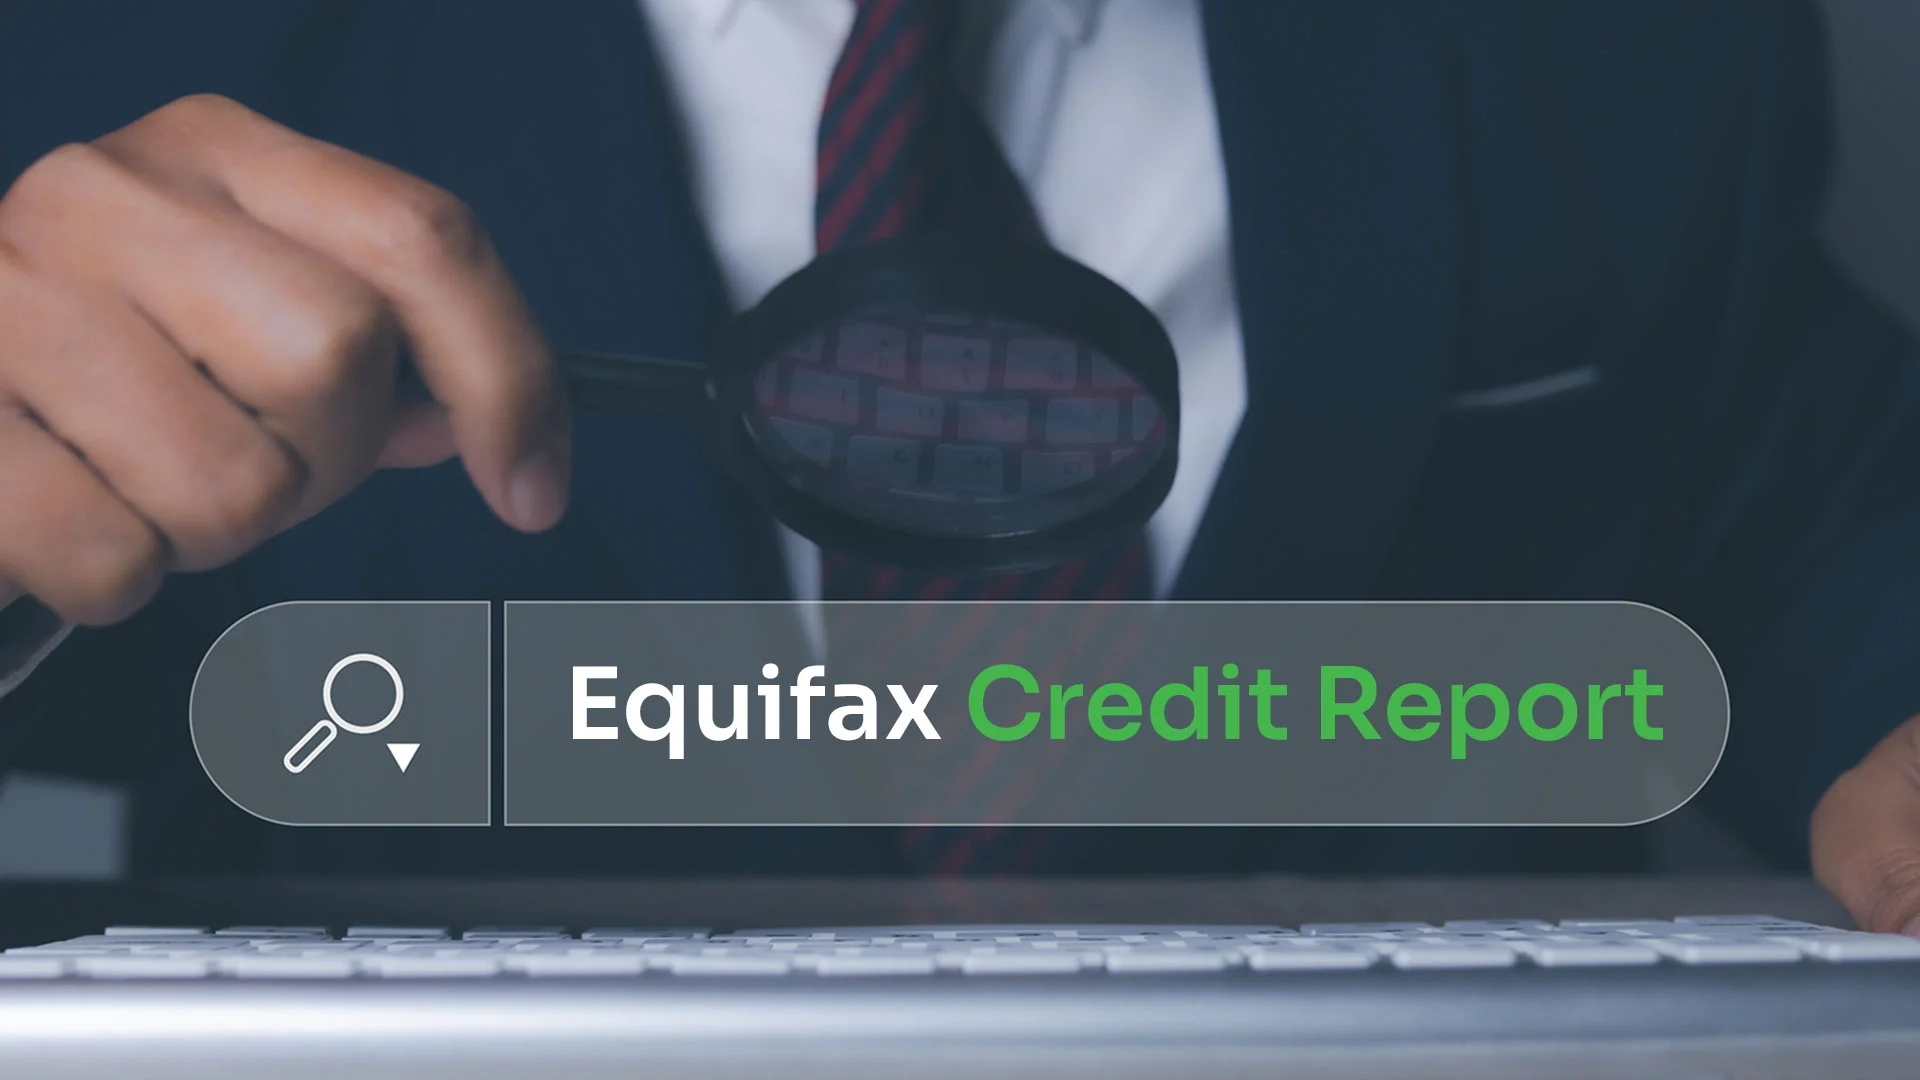 man looking at his equifax credit report through magnifying glass